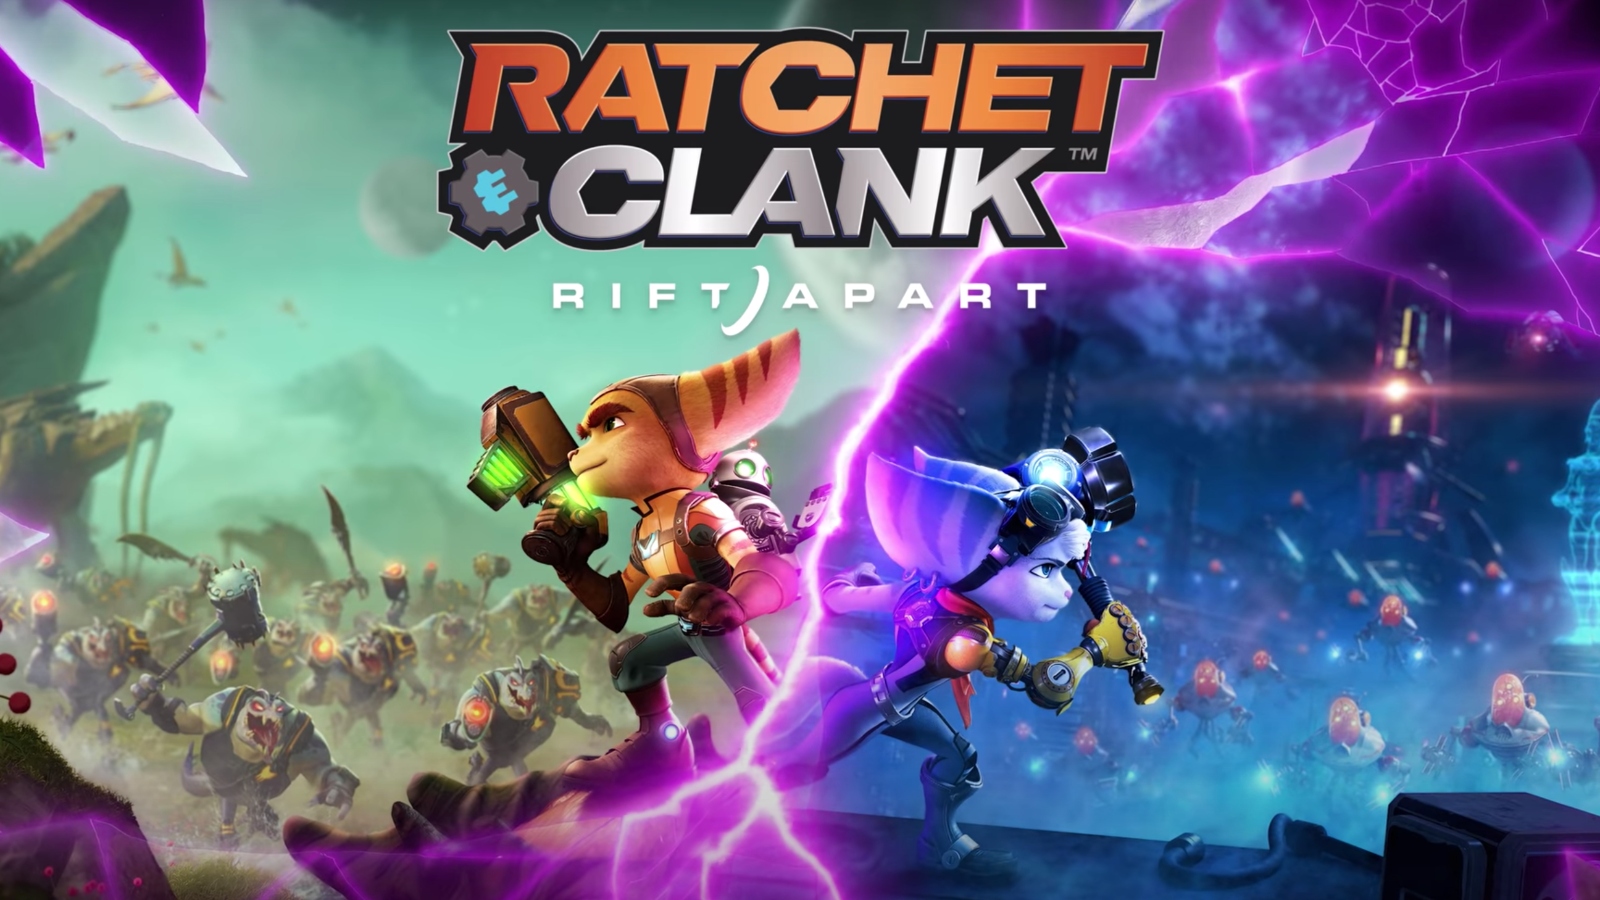 New Ratchet & Clank: Rift Apart Trailer Shows Off New Weapons & Gameplay